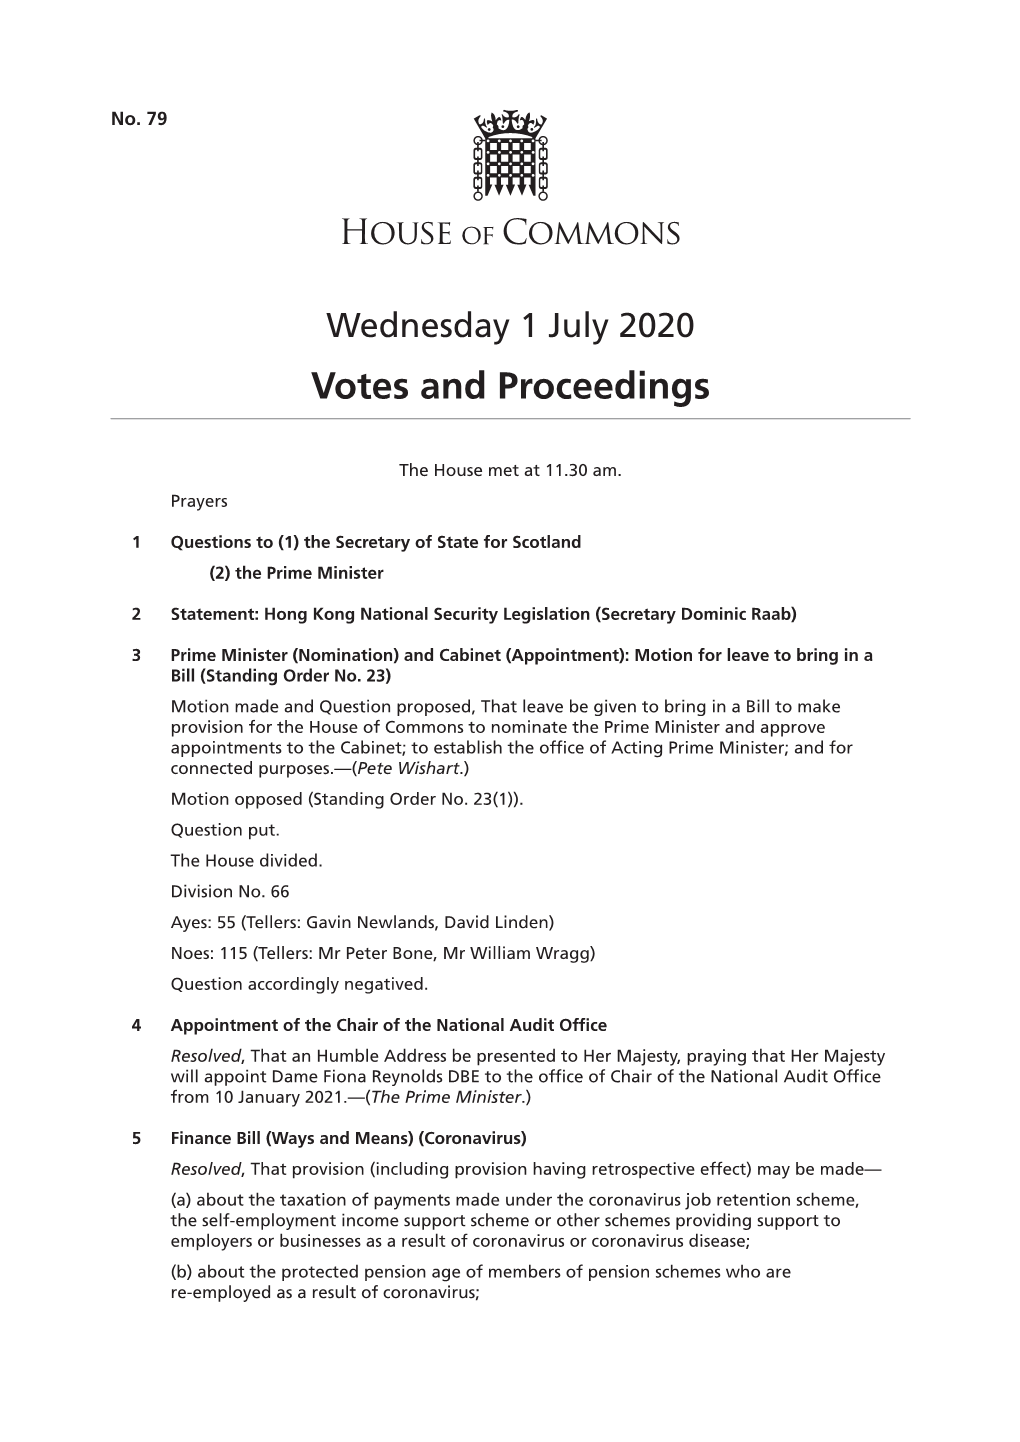 Votes and Proceedings for 1 Jul 2020